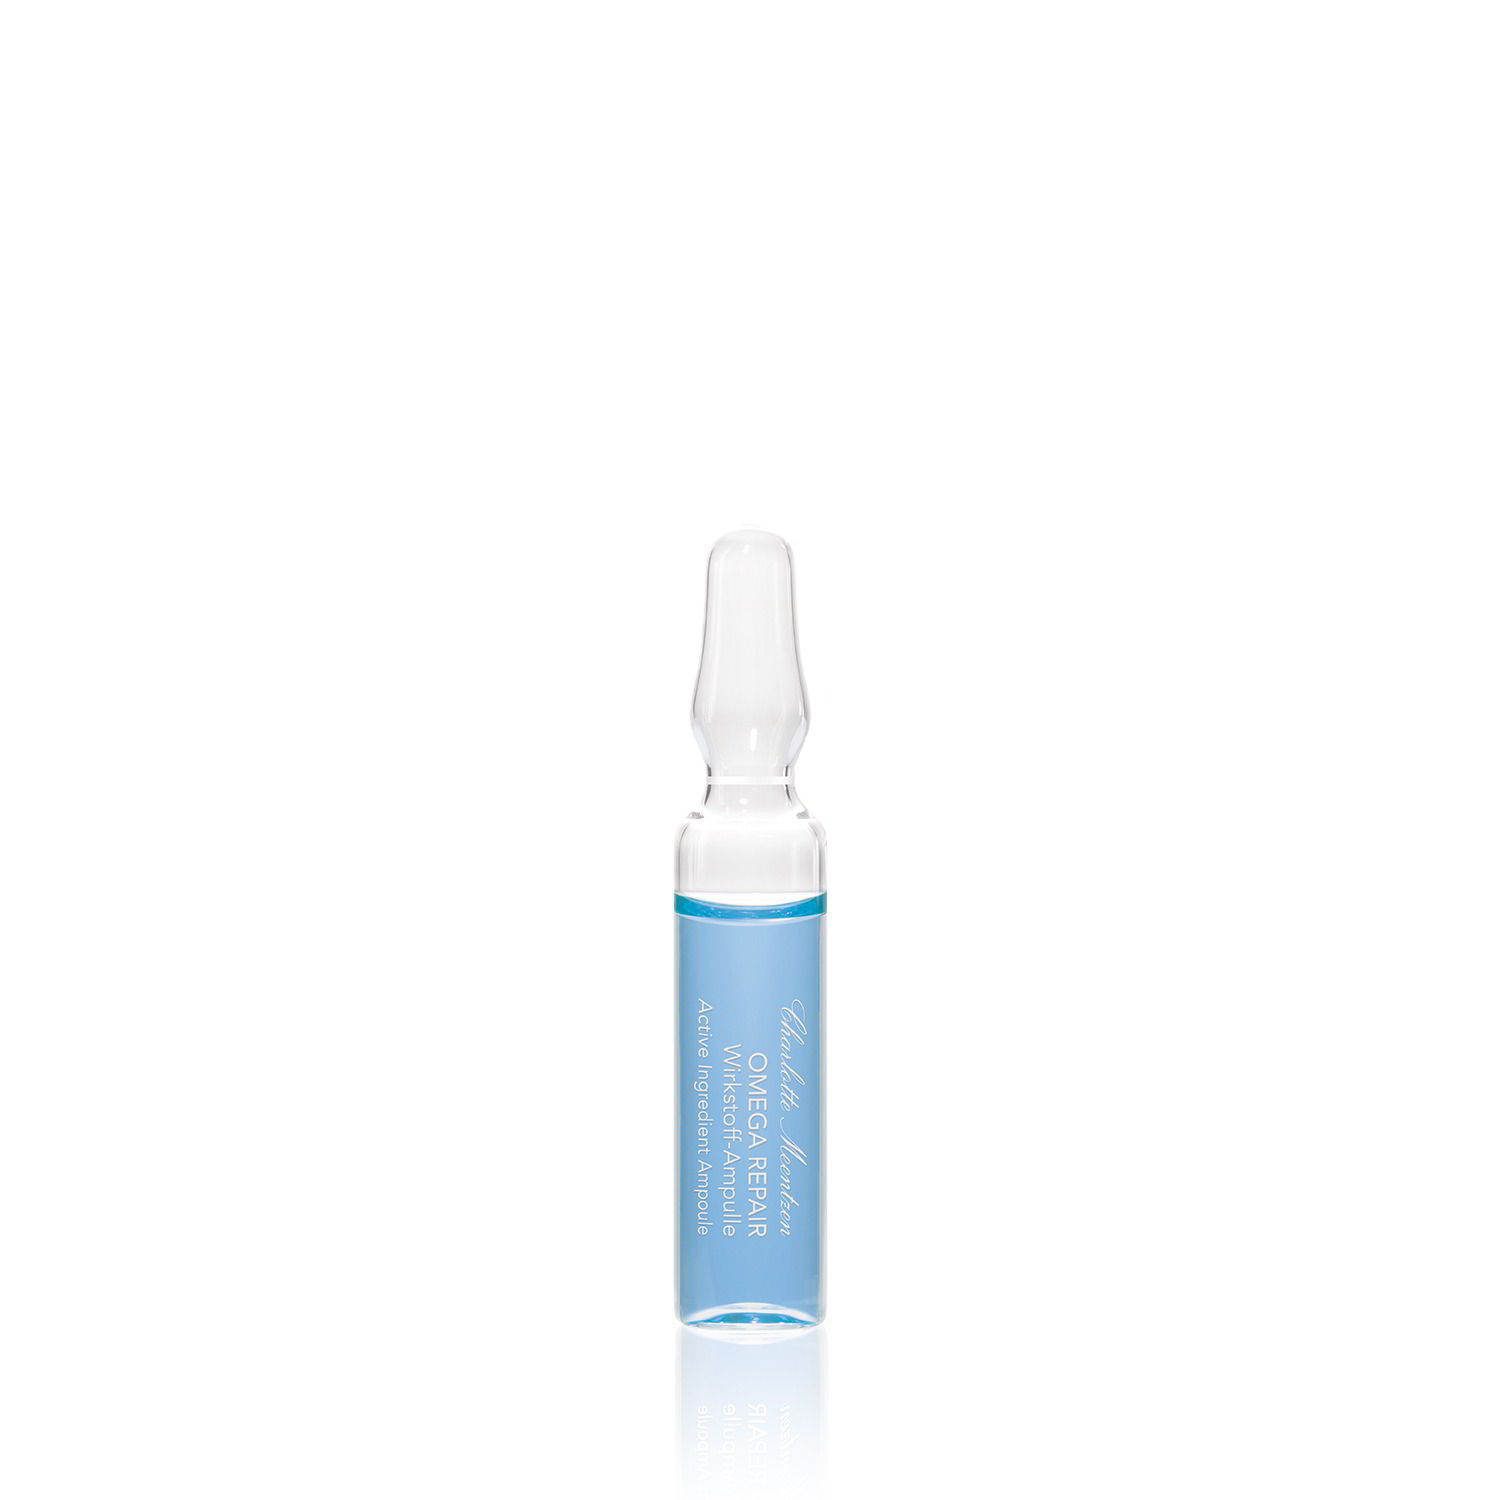 Ampoules OMEGA REPAIR Active Ingredient Ampoules 5 x 2 ml